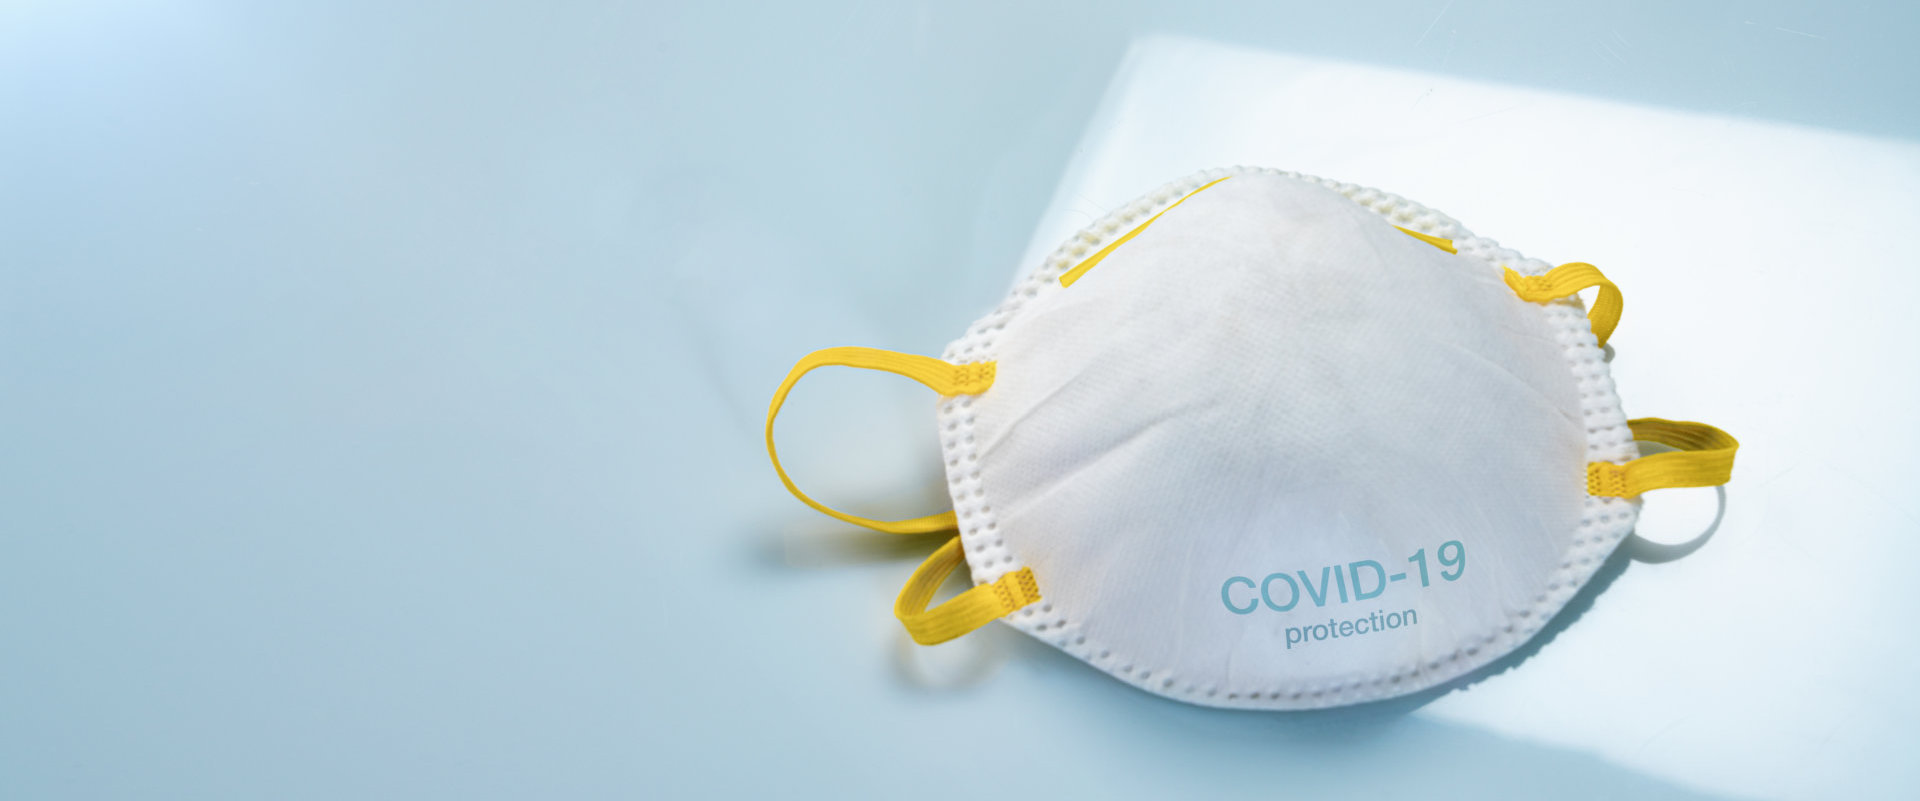 face mask, covid-19 protection